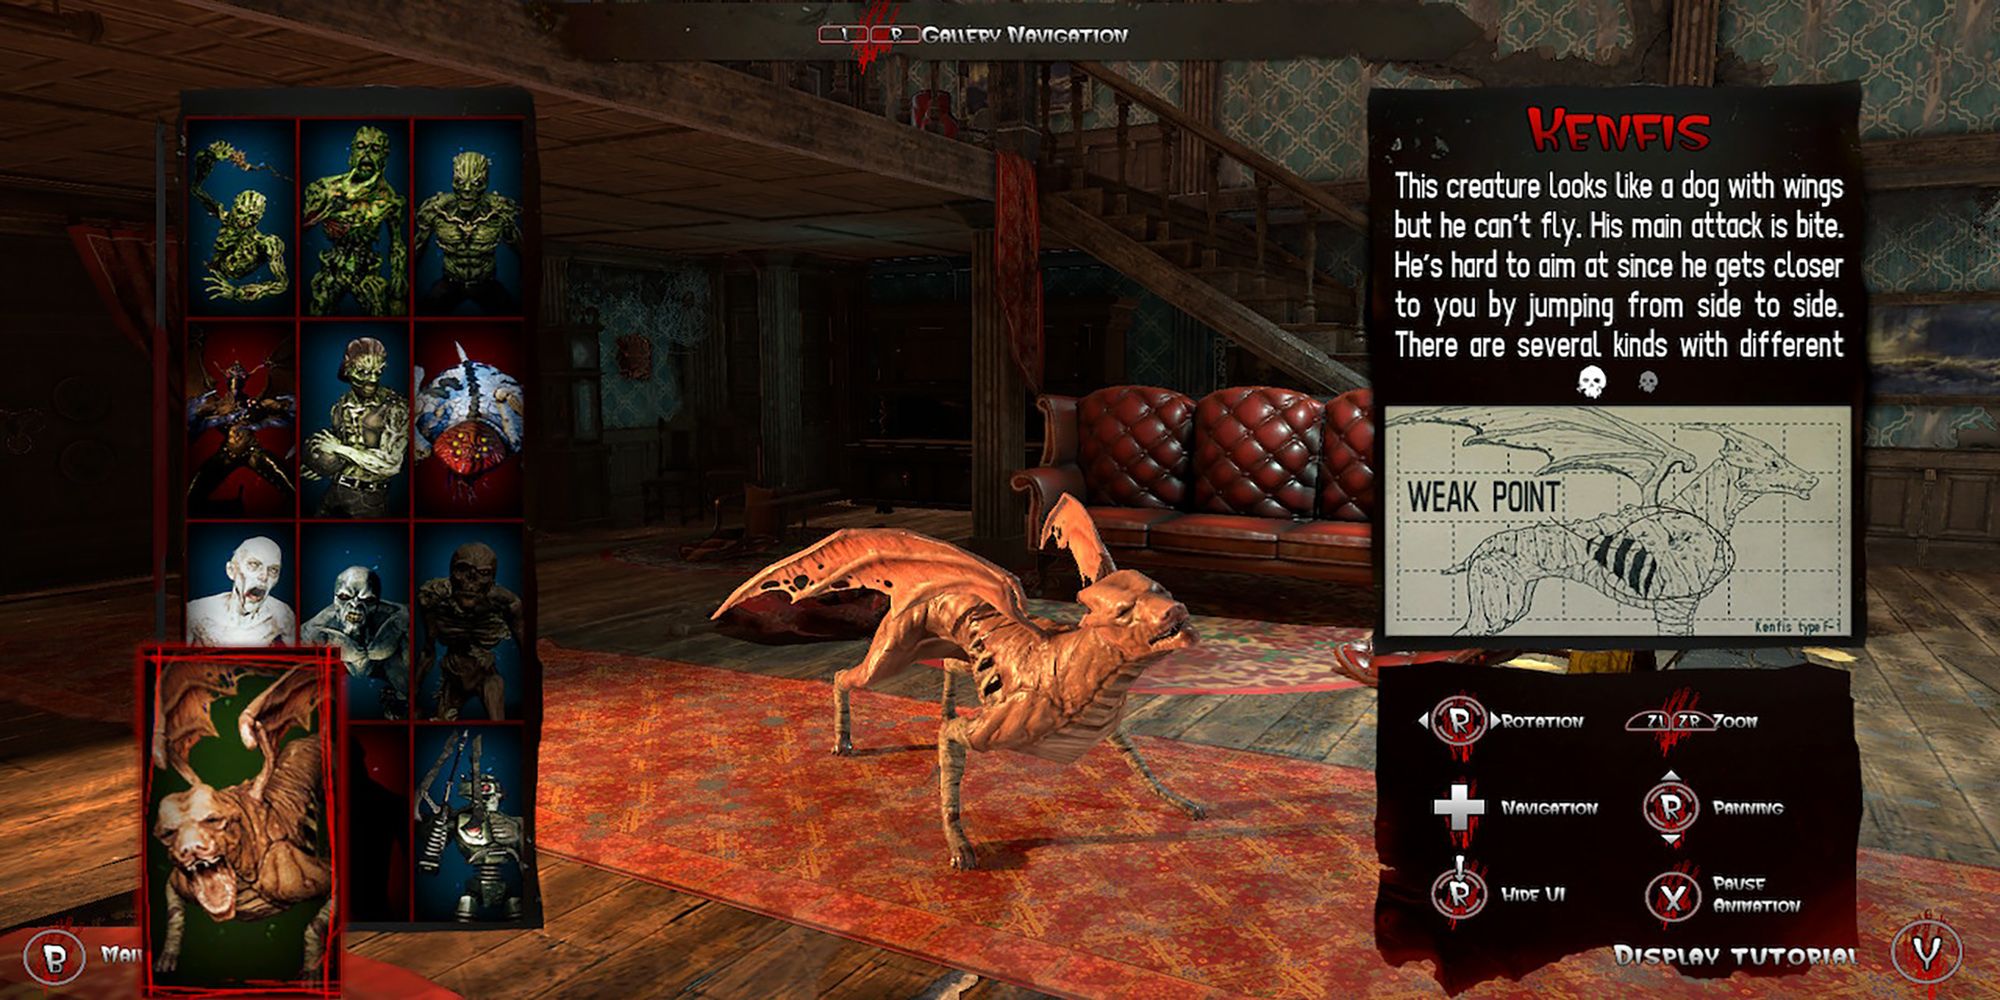 Kenfis's creature profile and weak spot diagram from the Creature Library in The House Of The Dead: Remake.